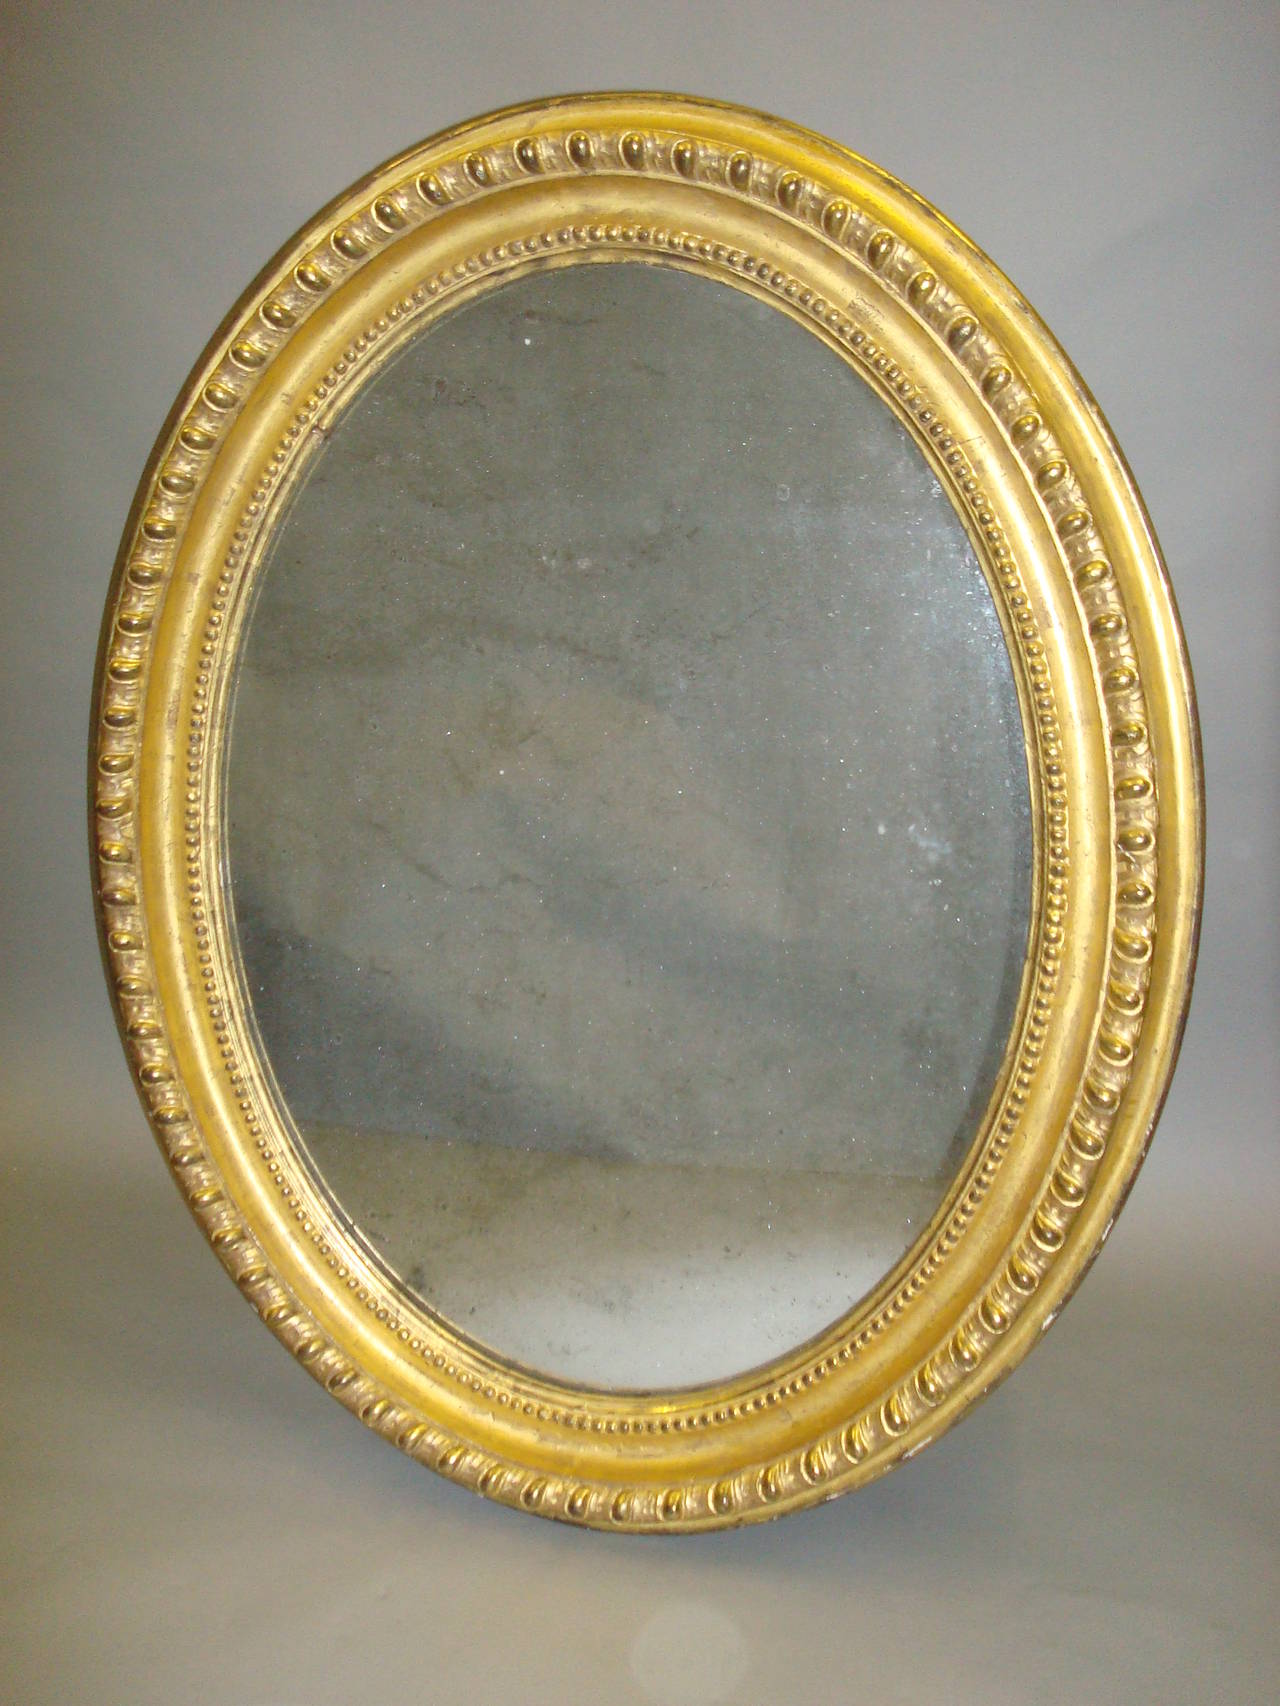 An early C19th giltwood oval wall mirror; the bold shaped frame with a prominent egg and dart border and a smaller beaded inner moulding, housing the original mercury mirror plate which has achieved a small amount of distressing.